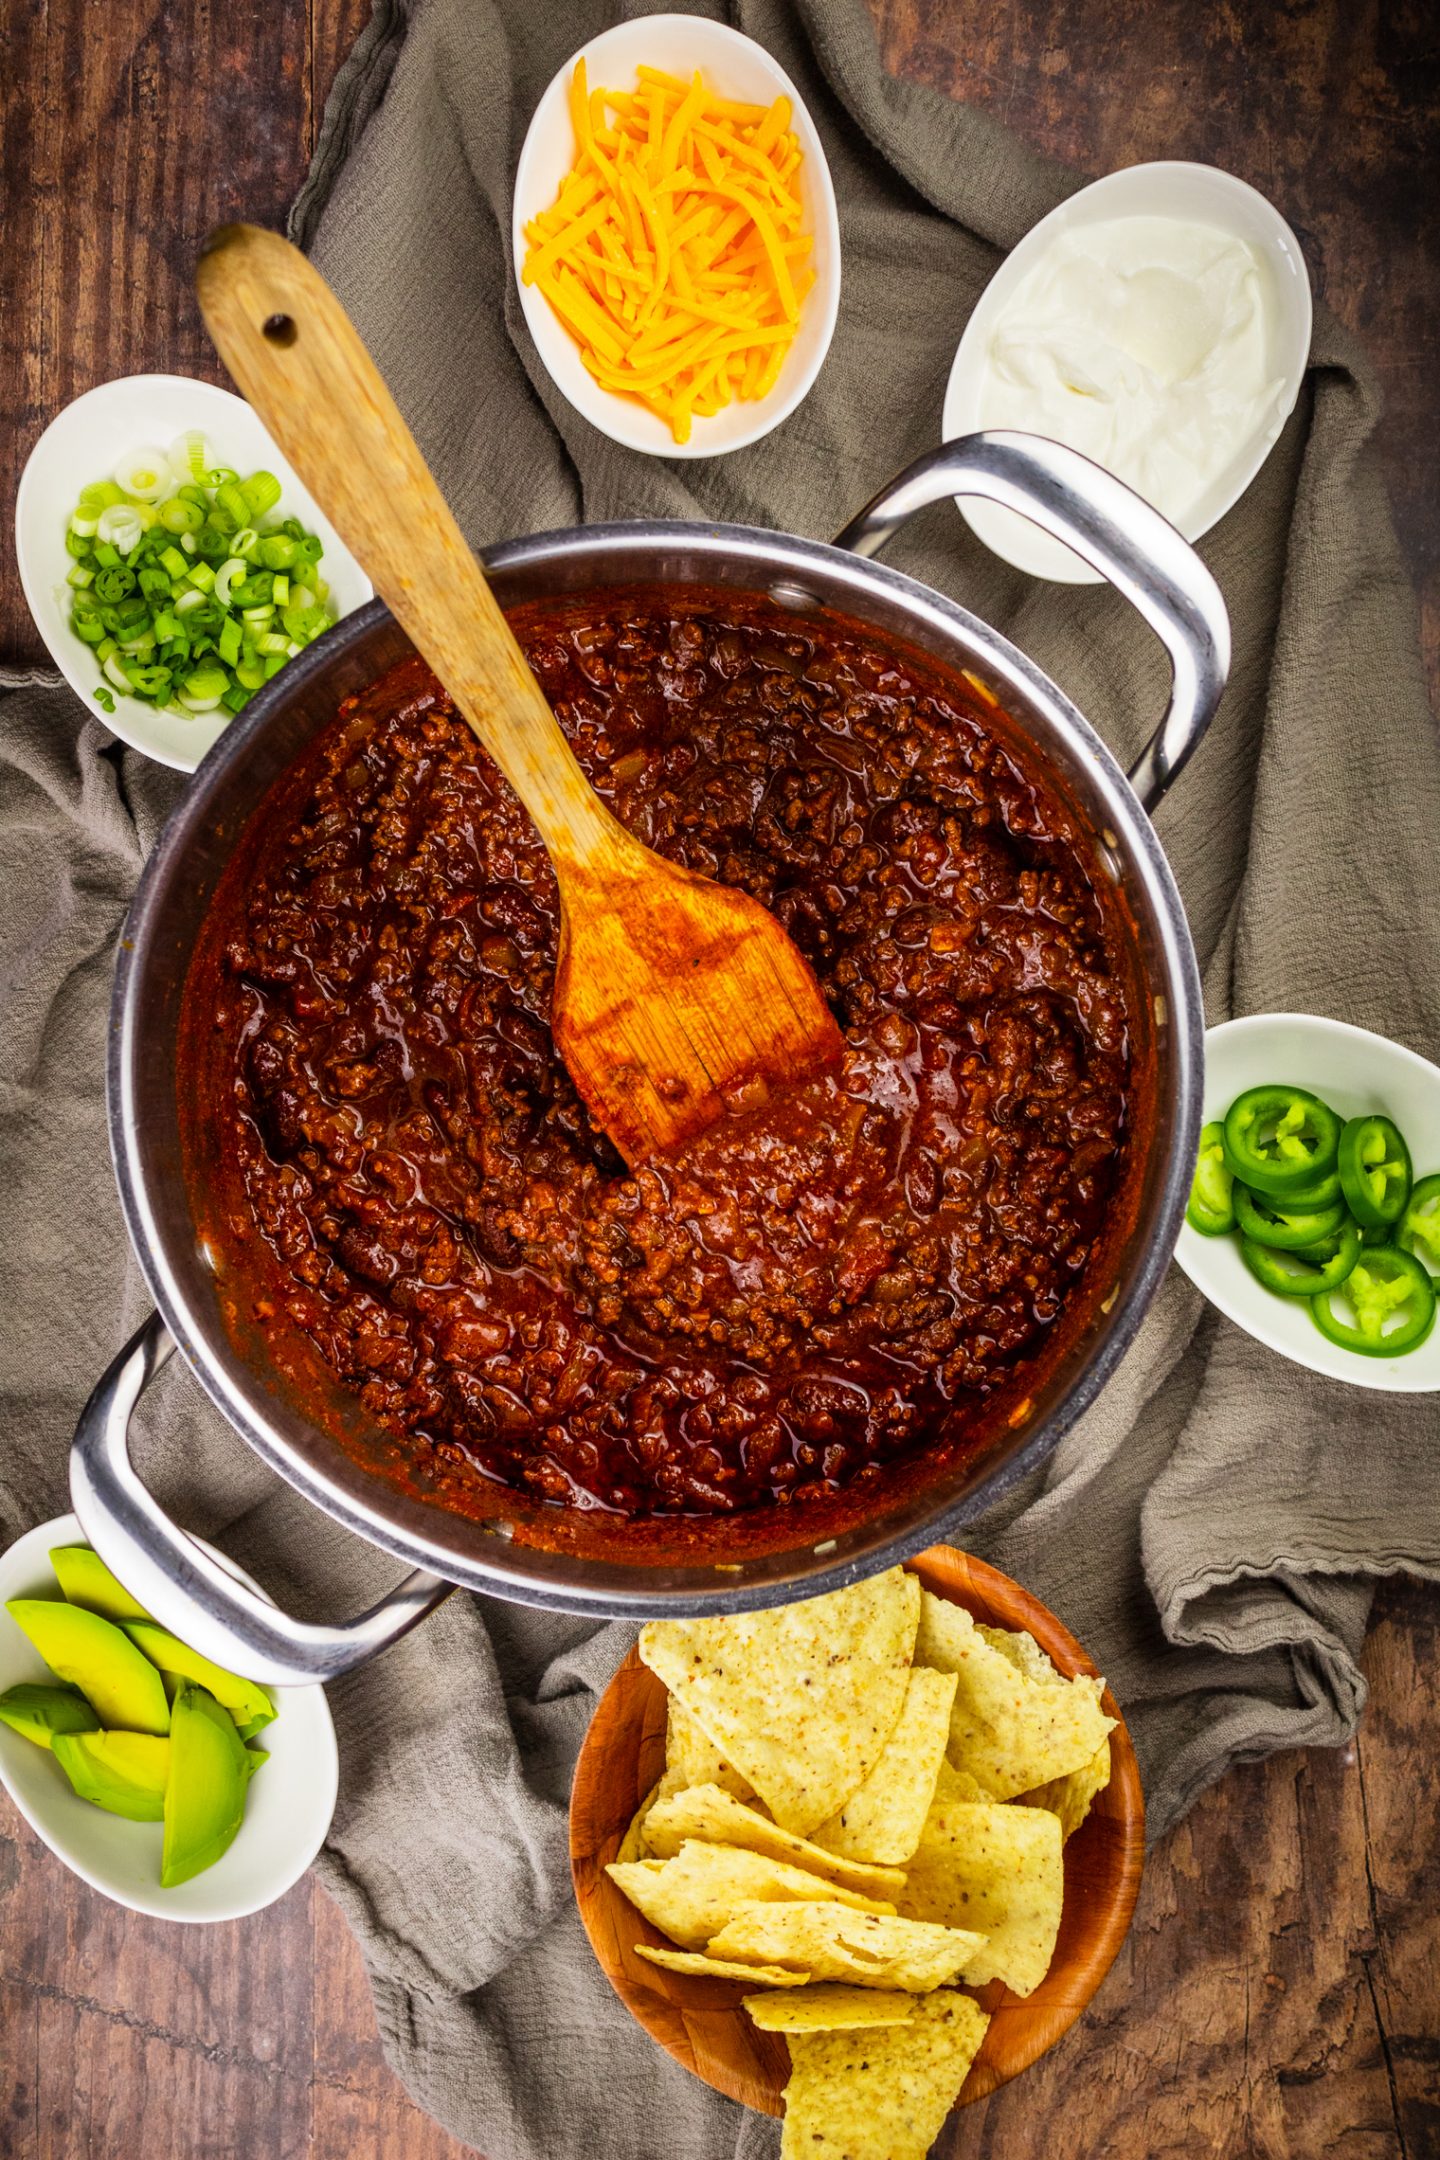 Beef chili with toppings